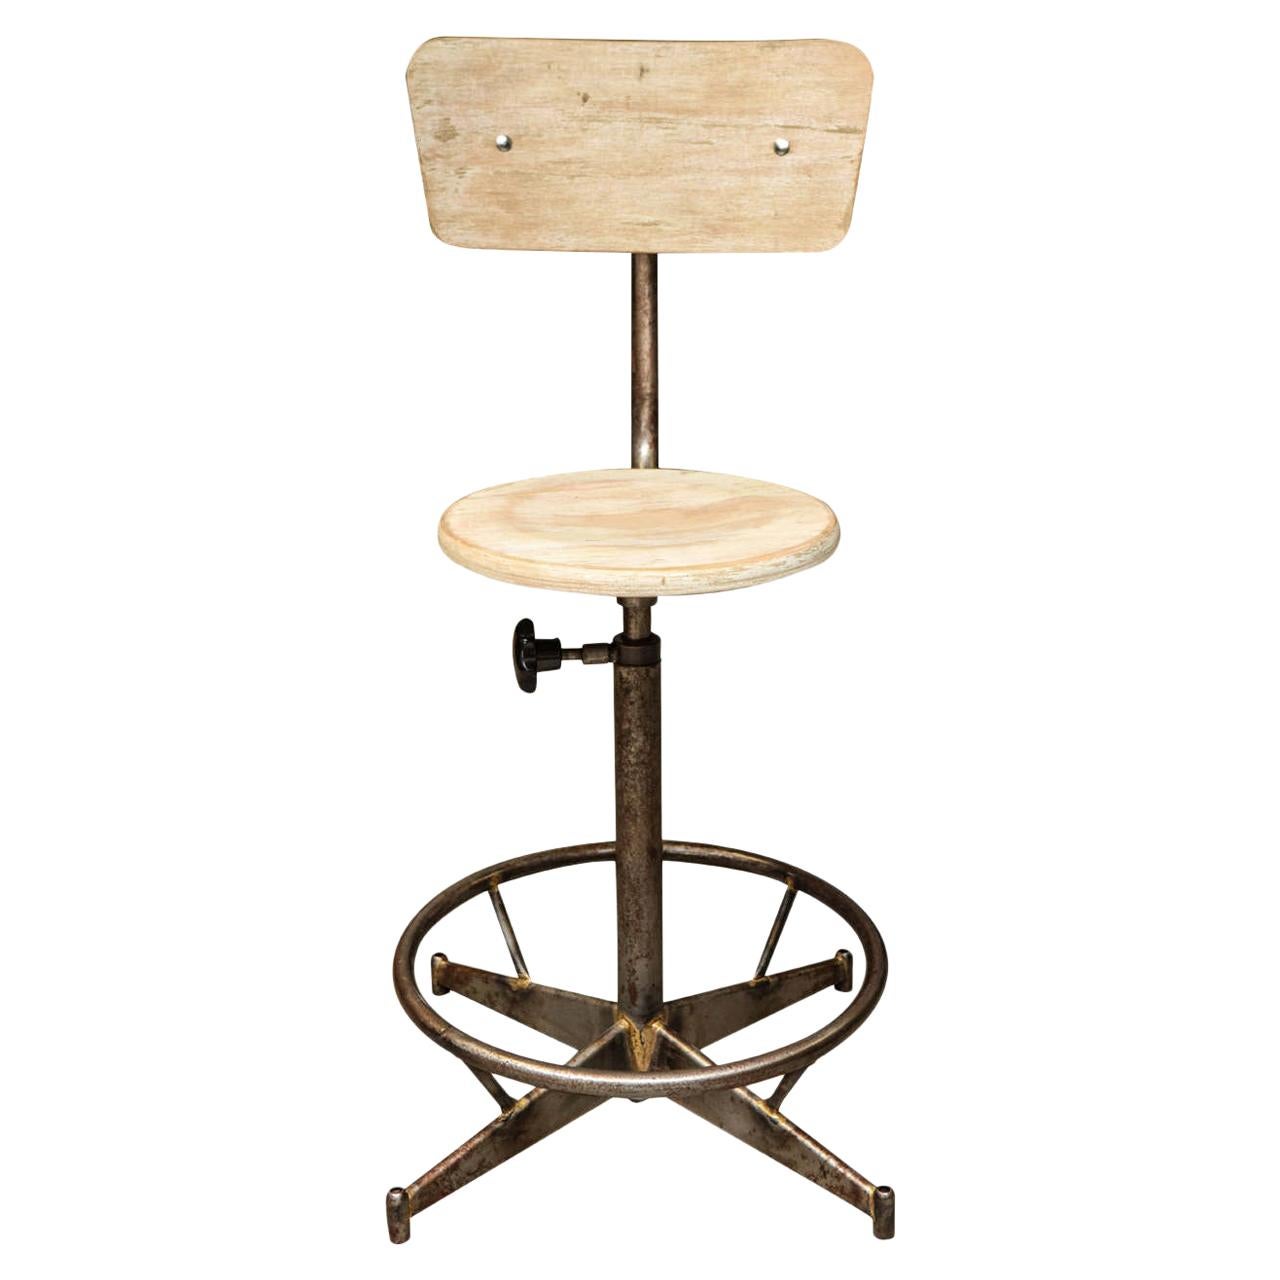 Antique Industrial Light Wood and Metal Adjustable Swivel High Chair